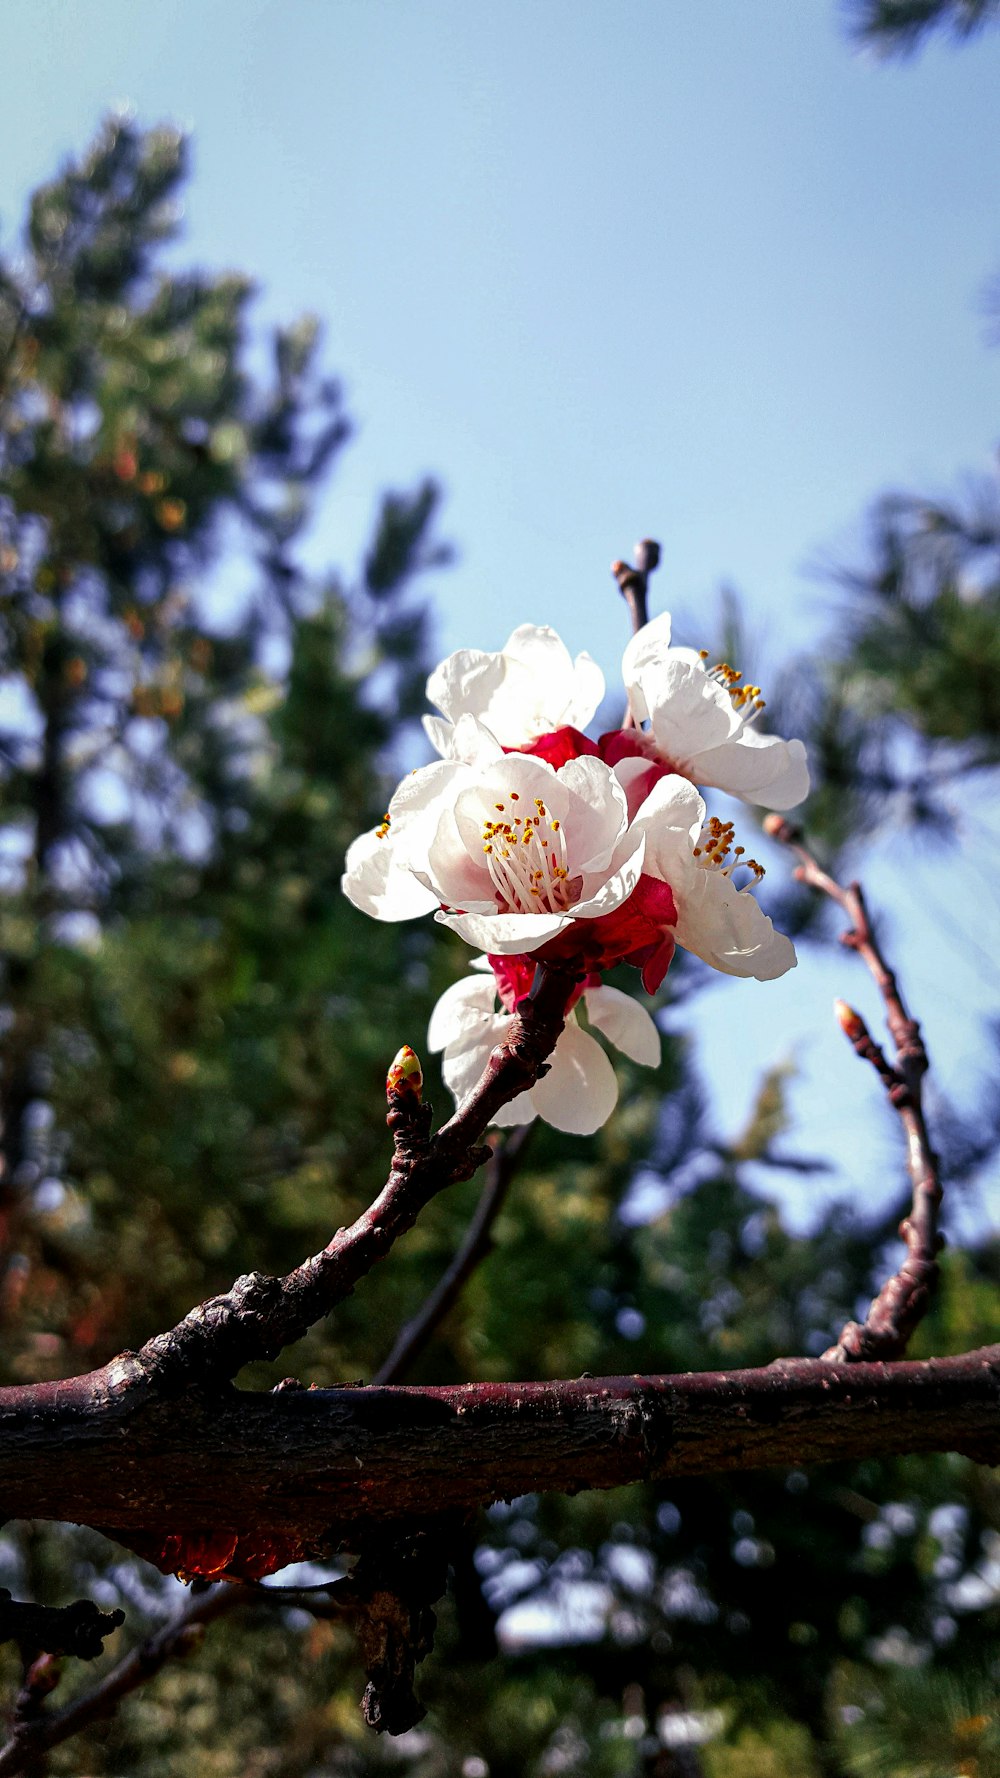 a white and red flower on a tree branch